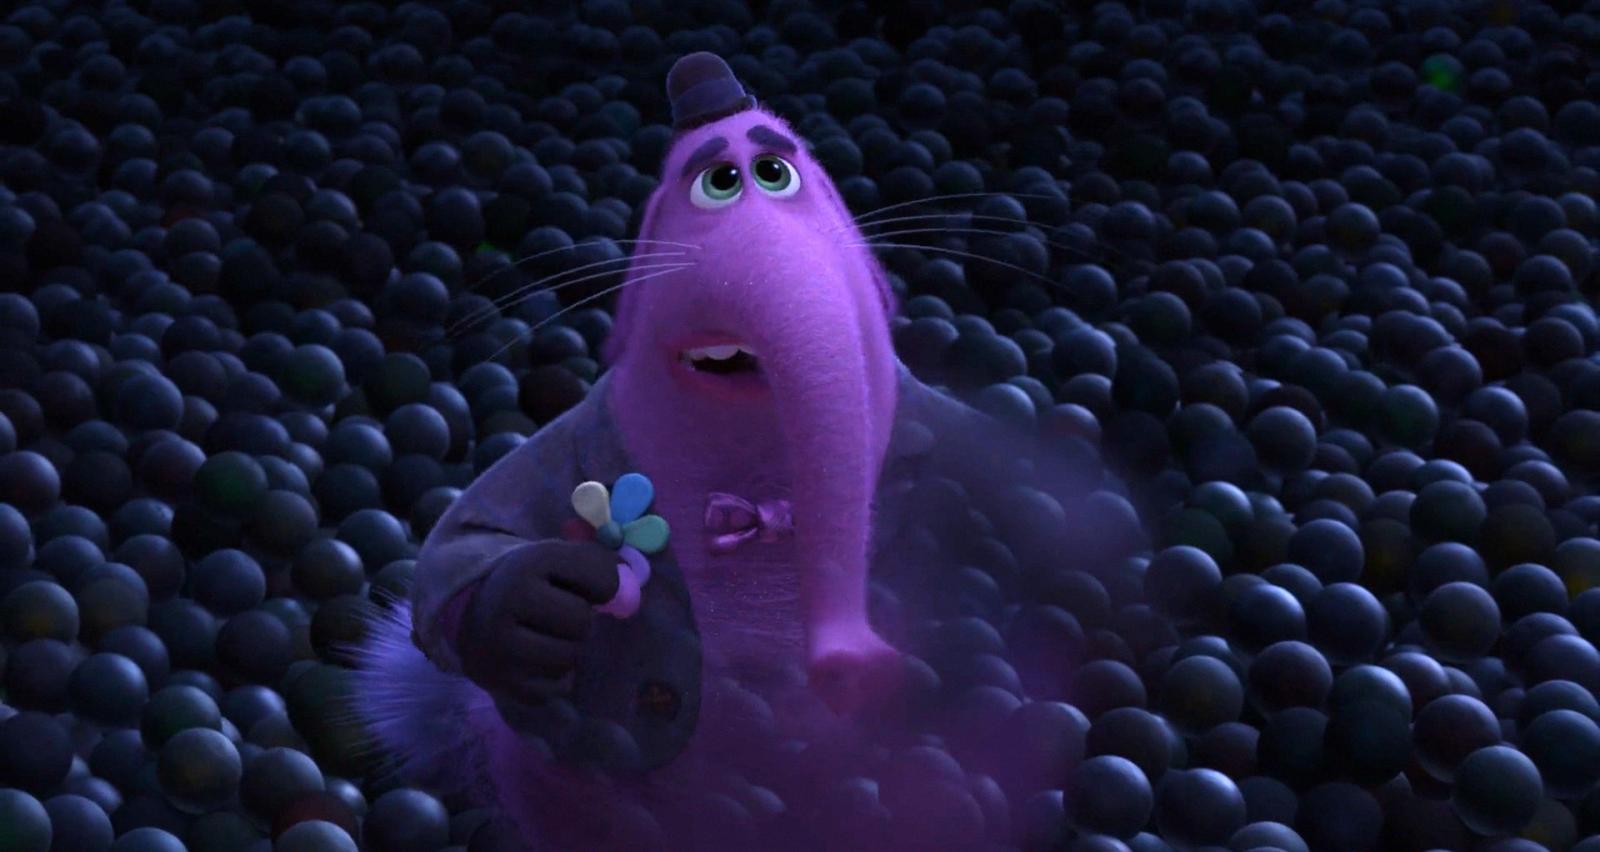 The 7 Most Emotional Moments in Pixar Movies Ranked - image 6